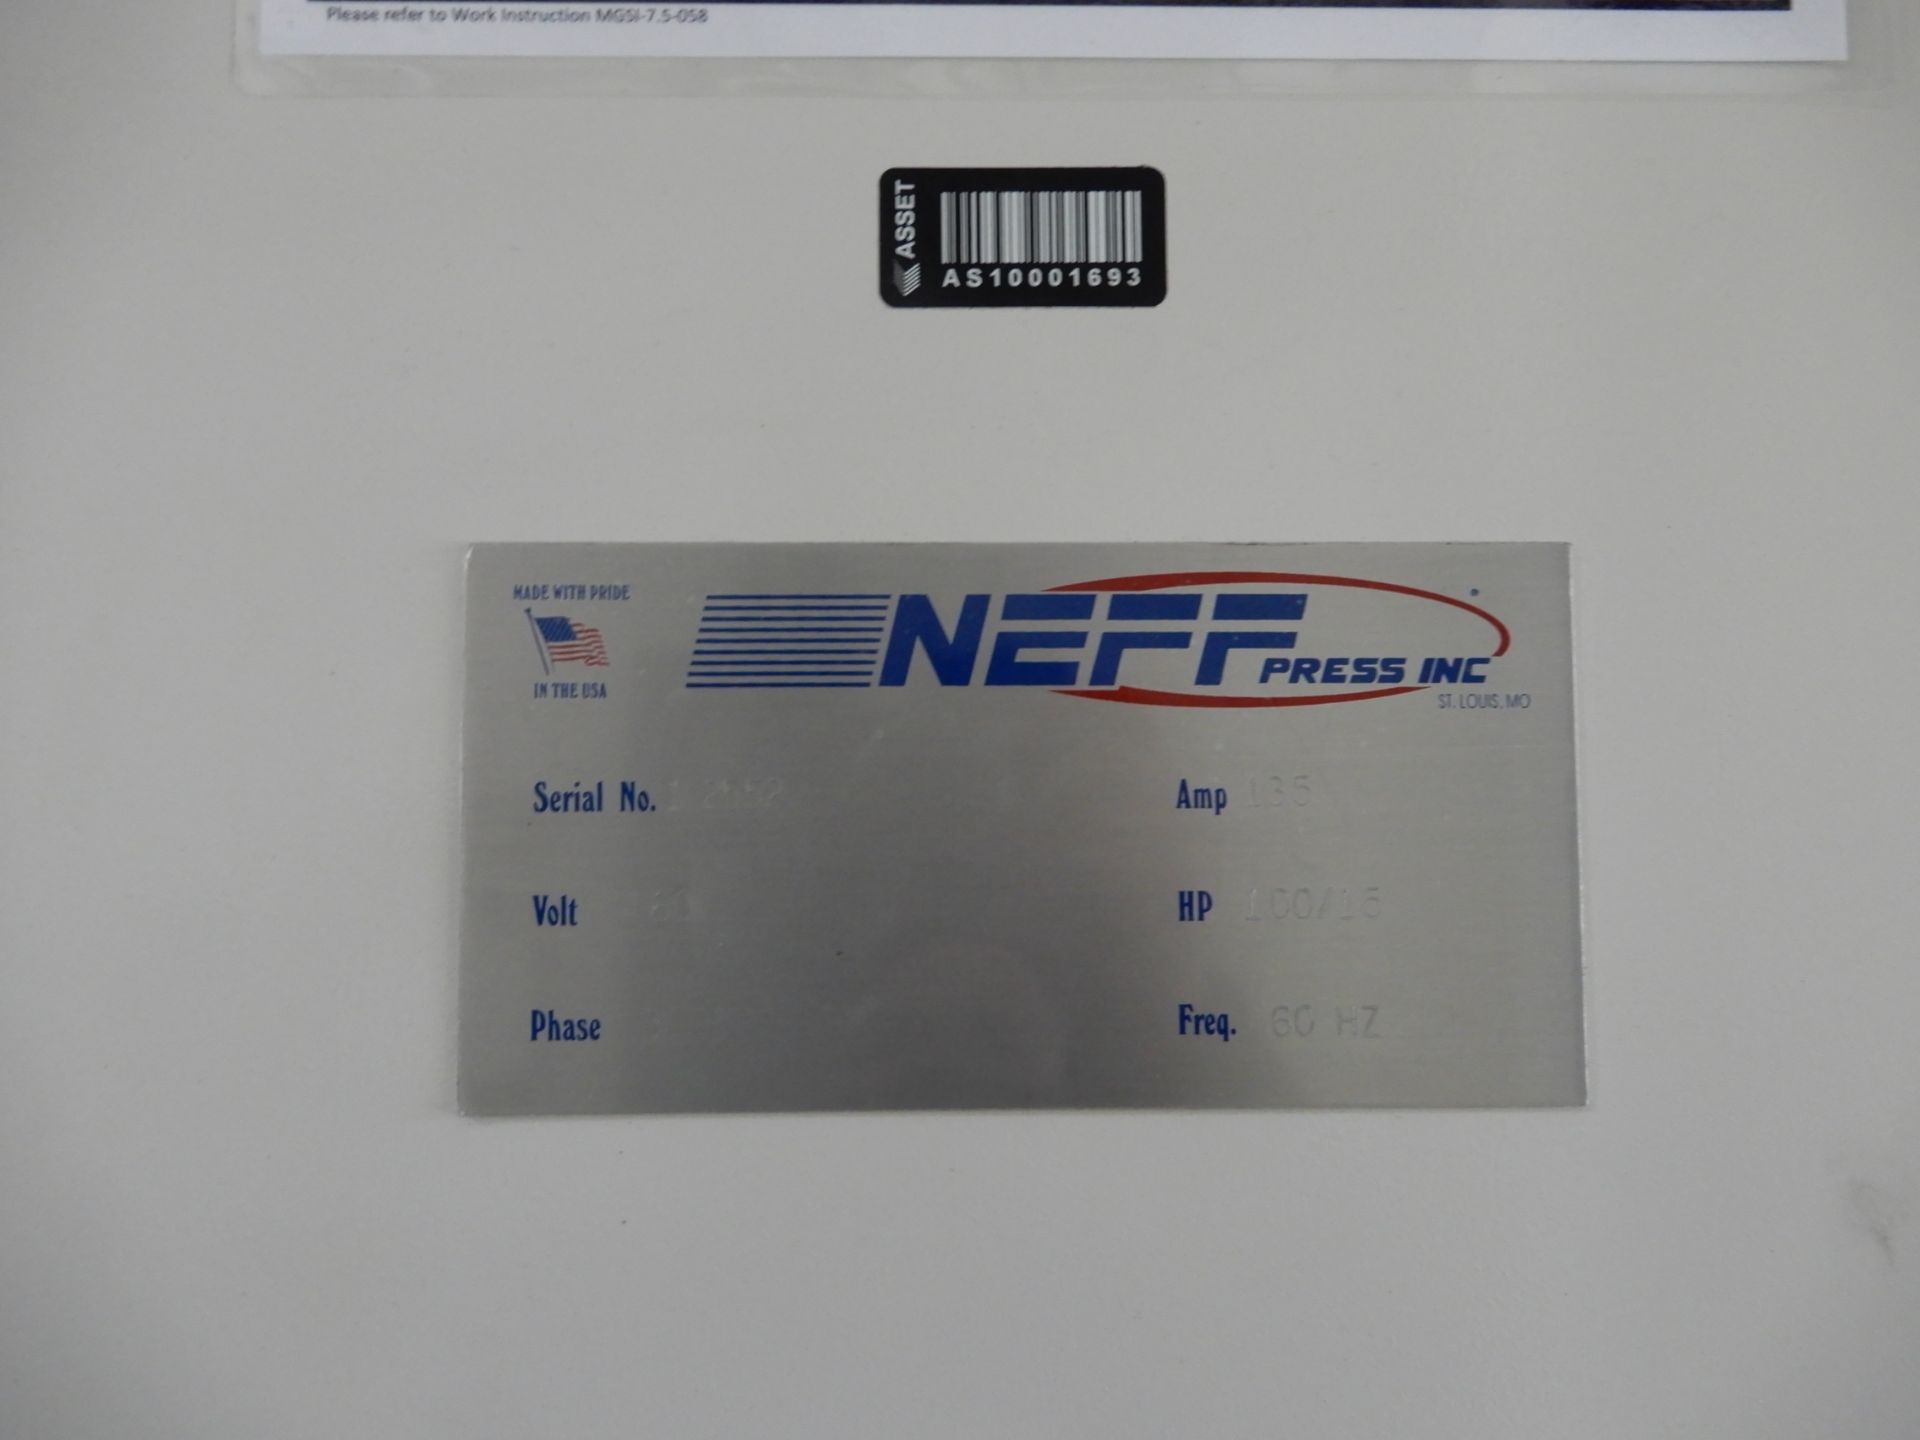 NEFF 200 Ton 4-Post Down Acting Hydraulic Press (Vertical Injection molding system) - Image 23 of 62